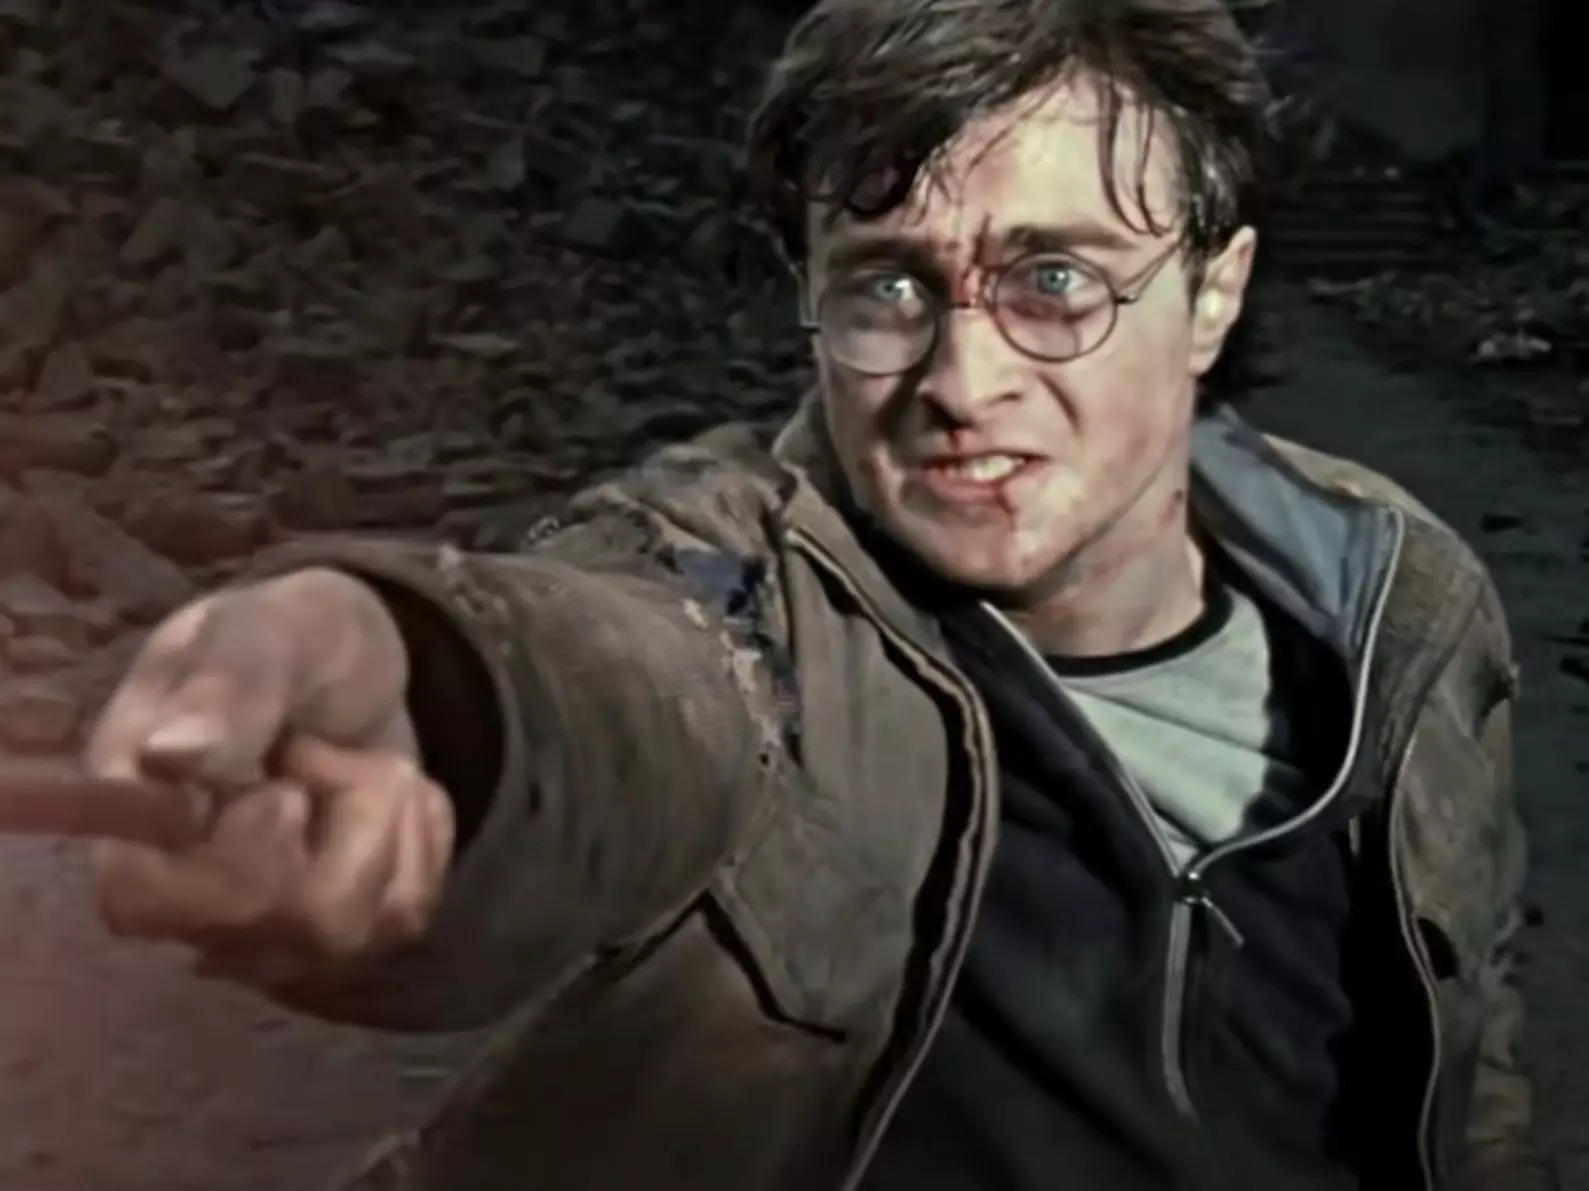 Daniel Radcliffe as Harry Potter in "Harry Potter and the Deathly Hallows: Part 2."